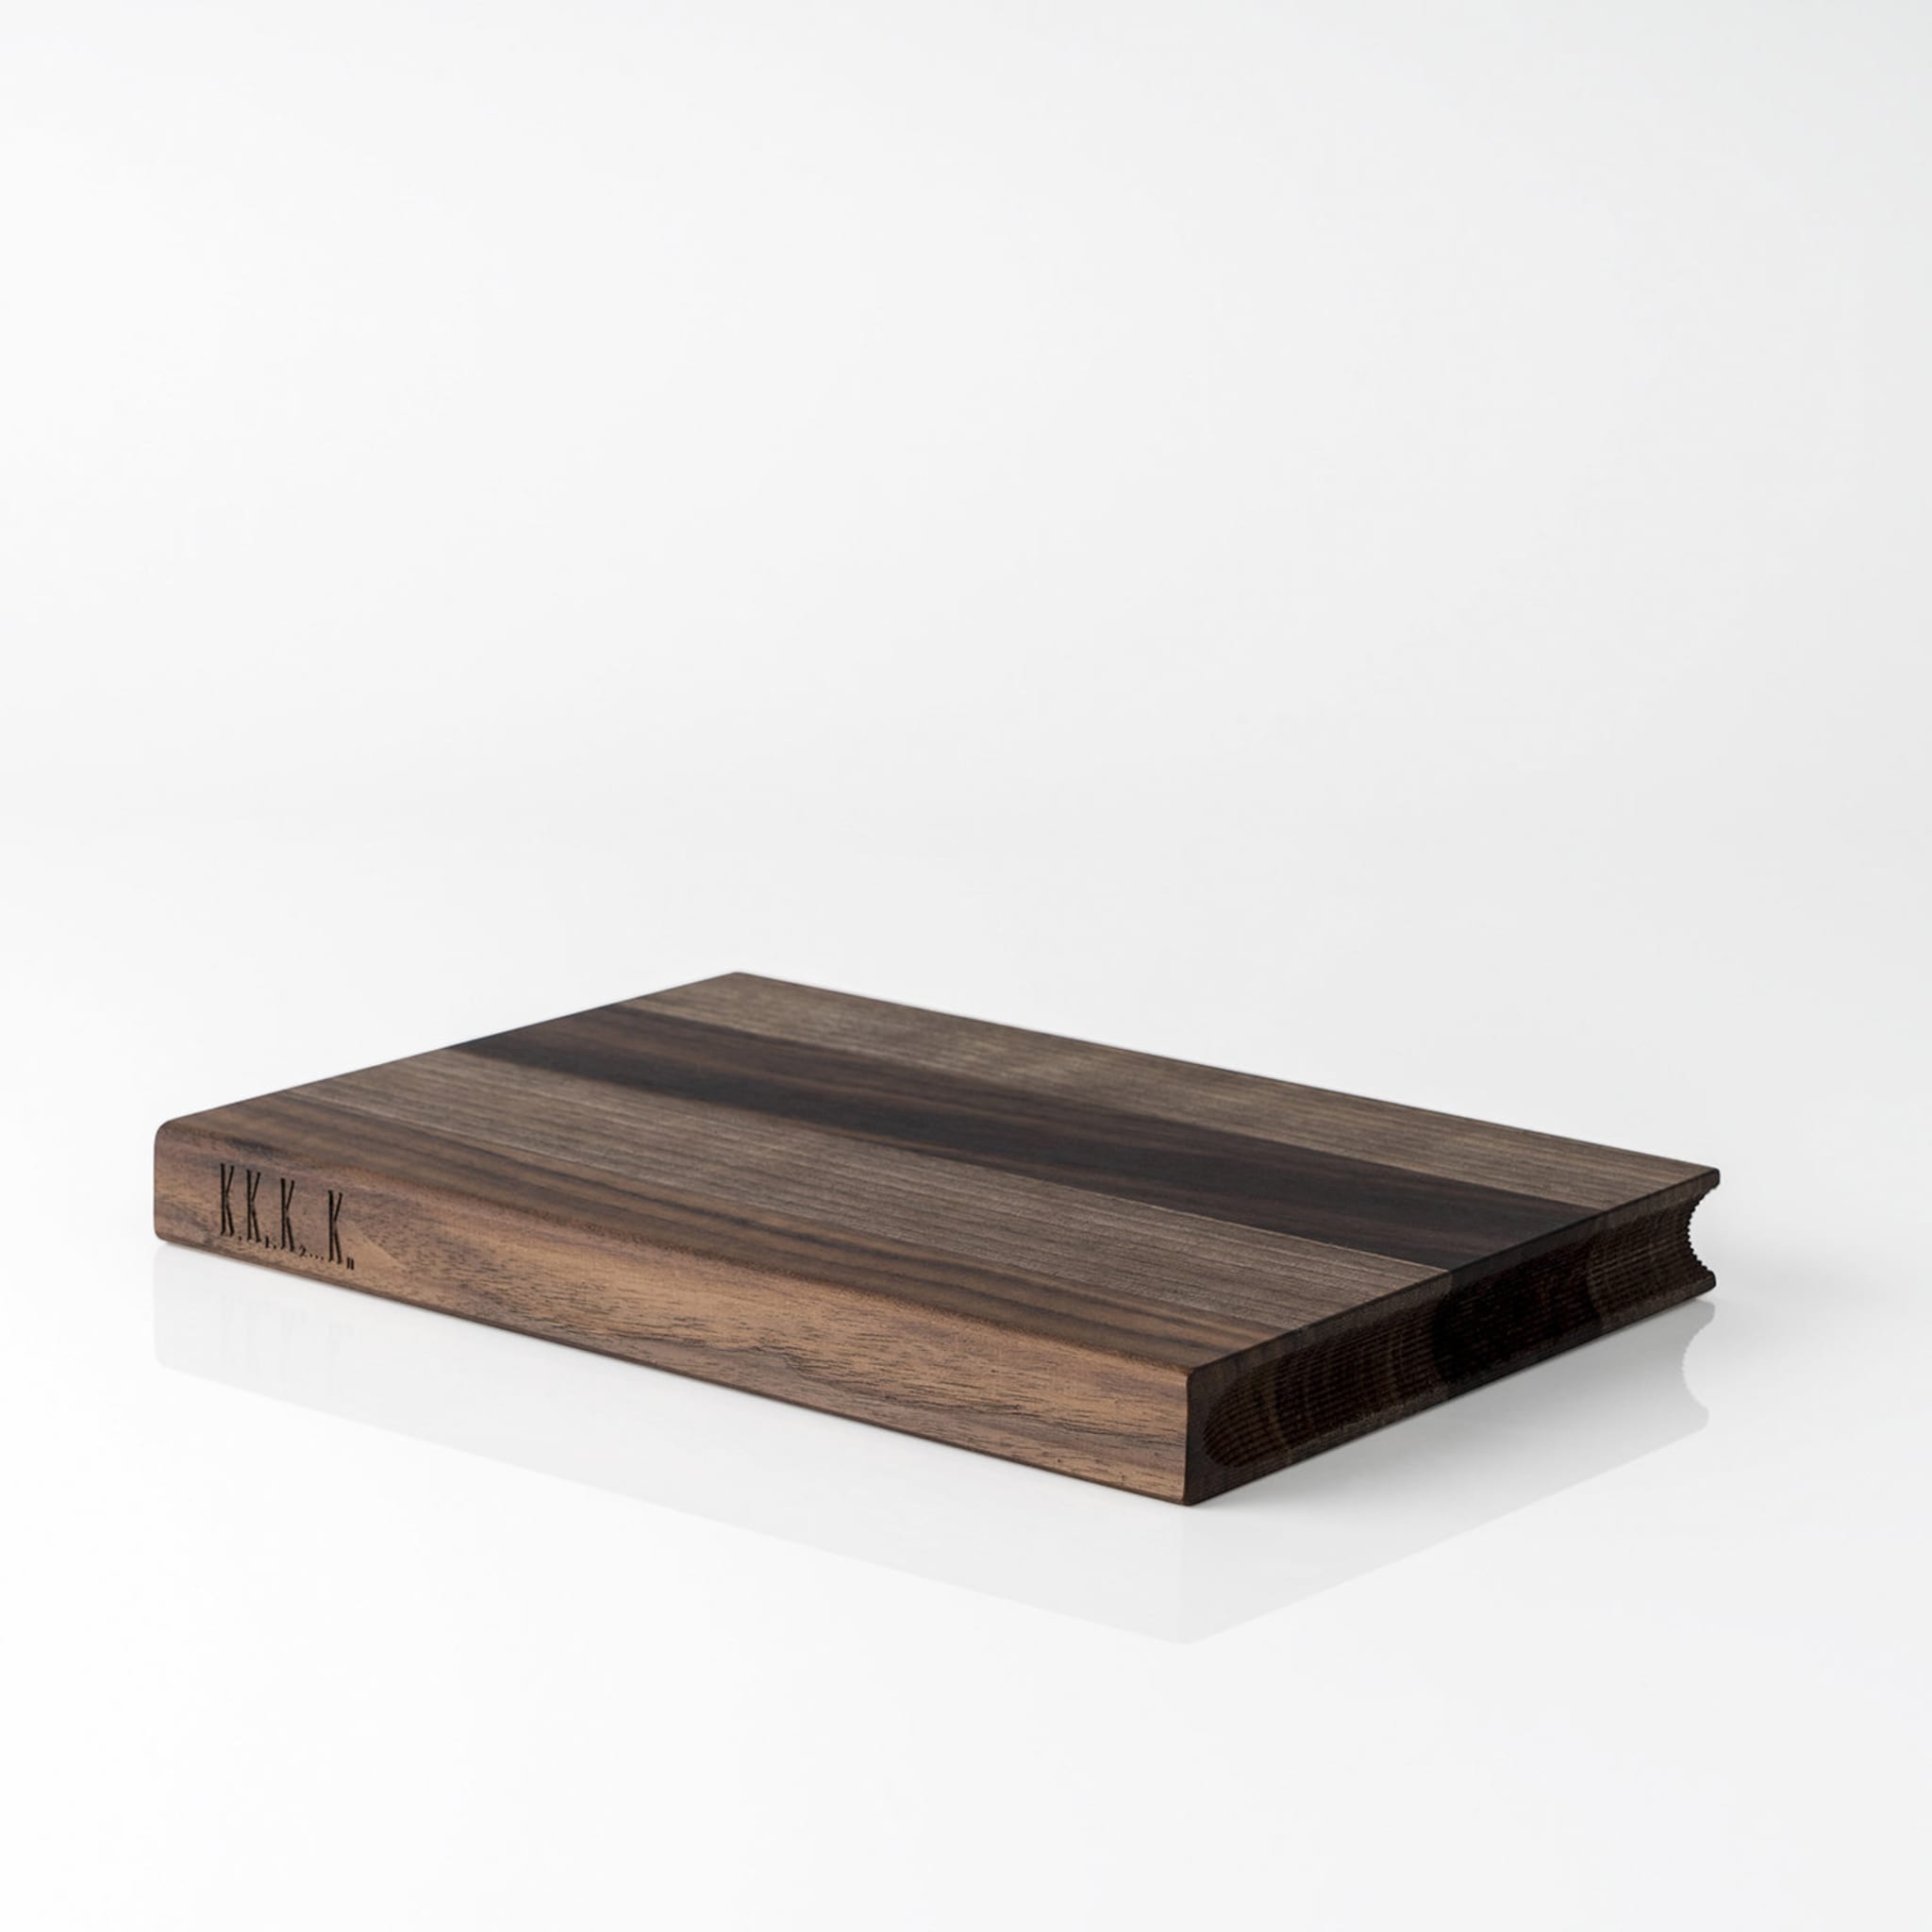 KN Book Set of 3 Cutting Boards by Roberto Vaia - Alternative view 3